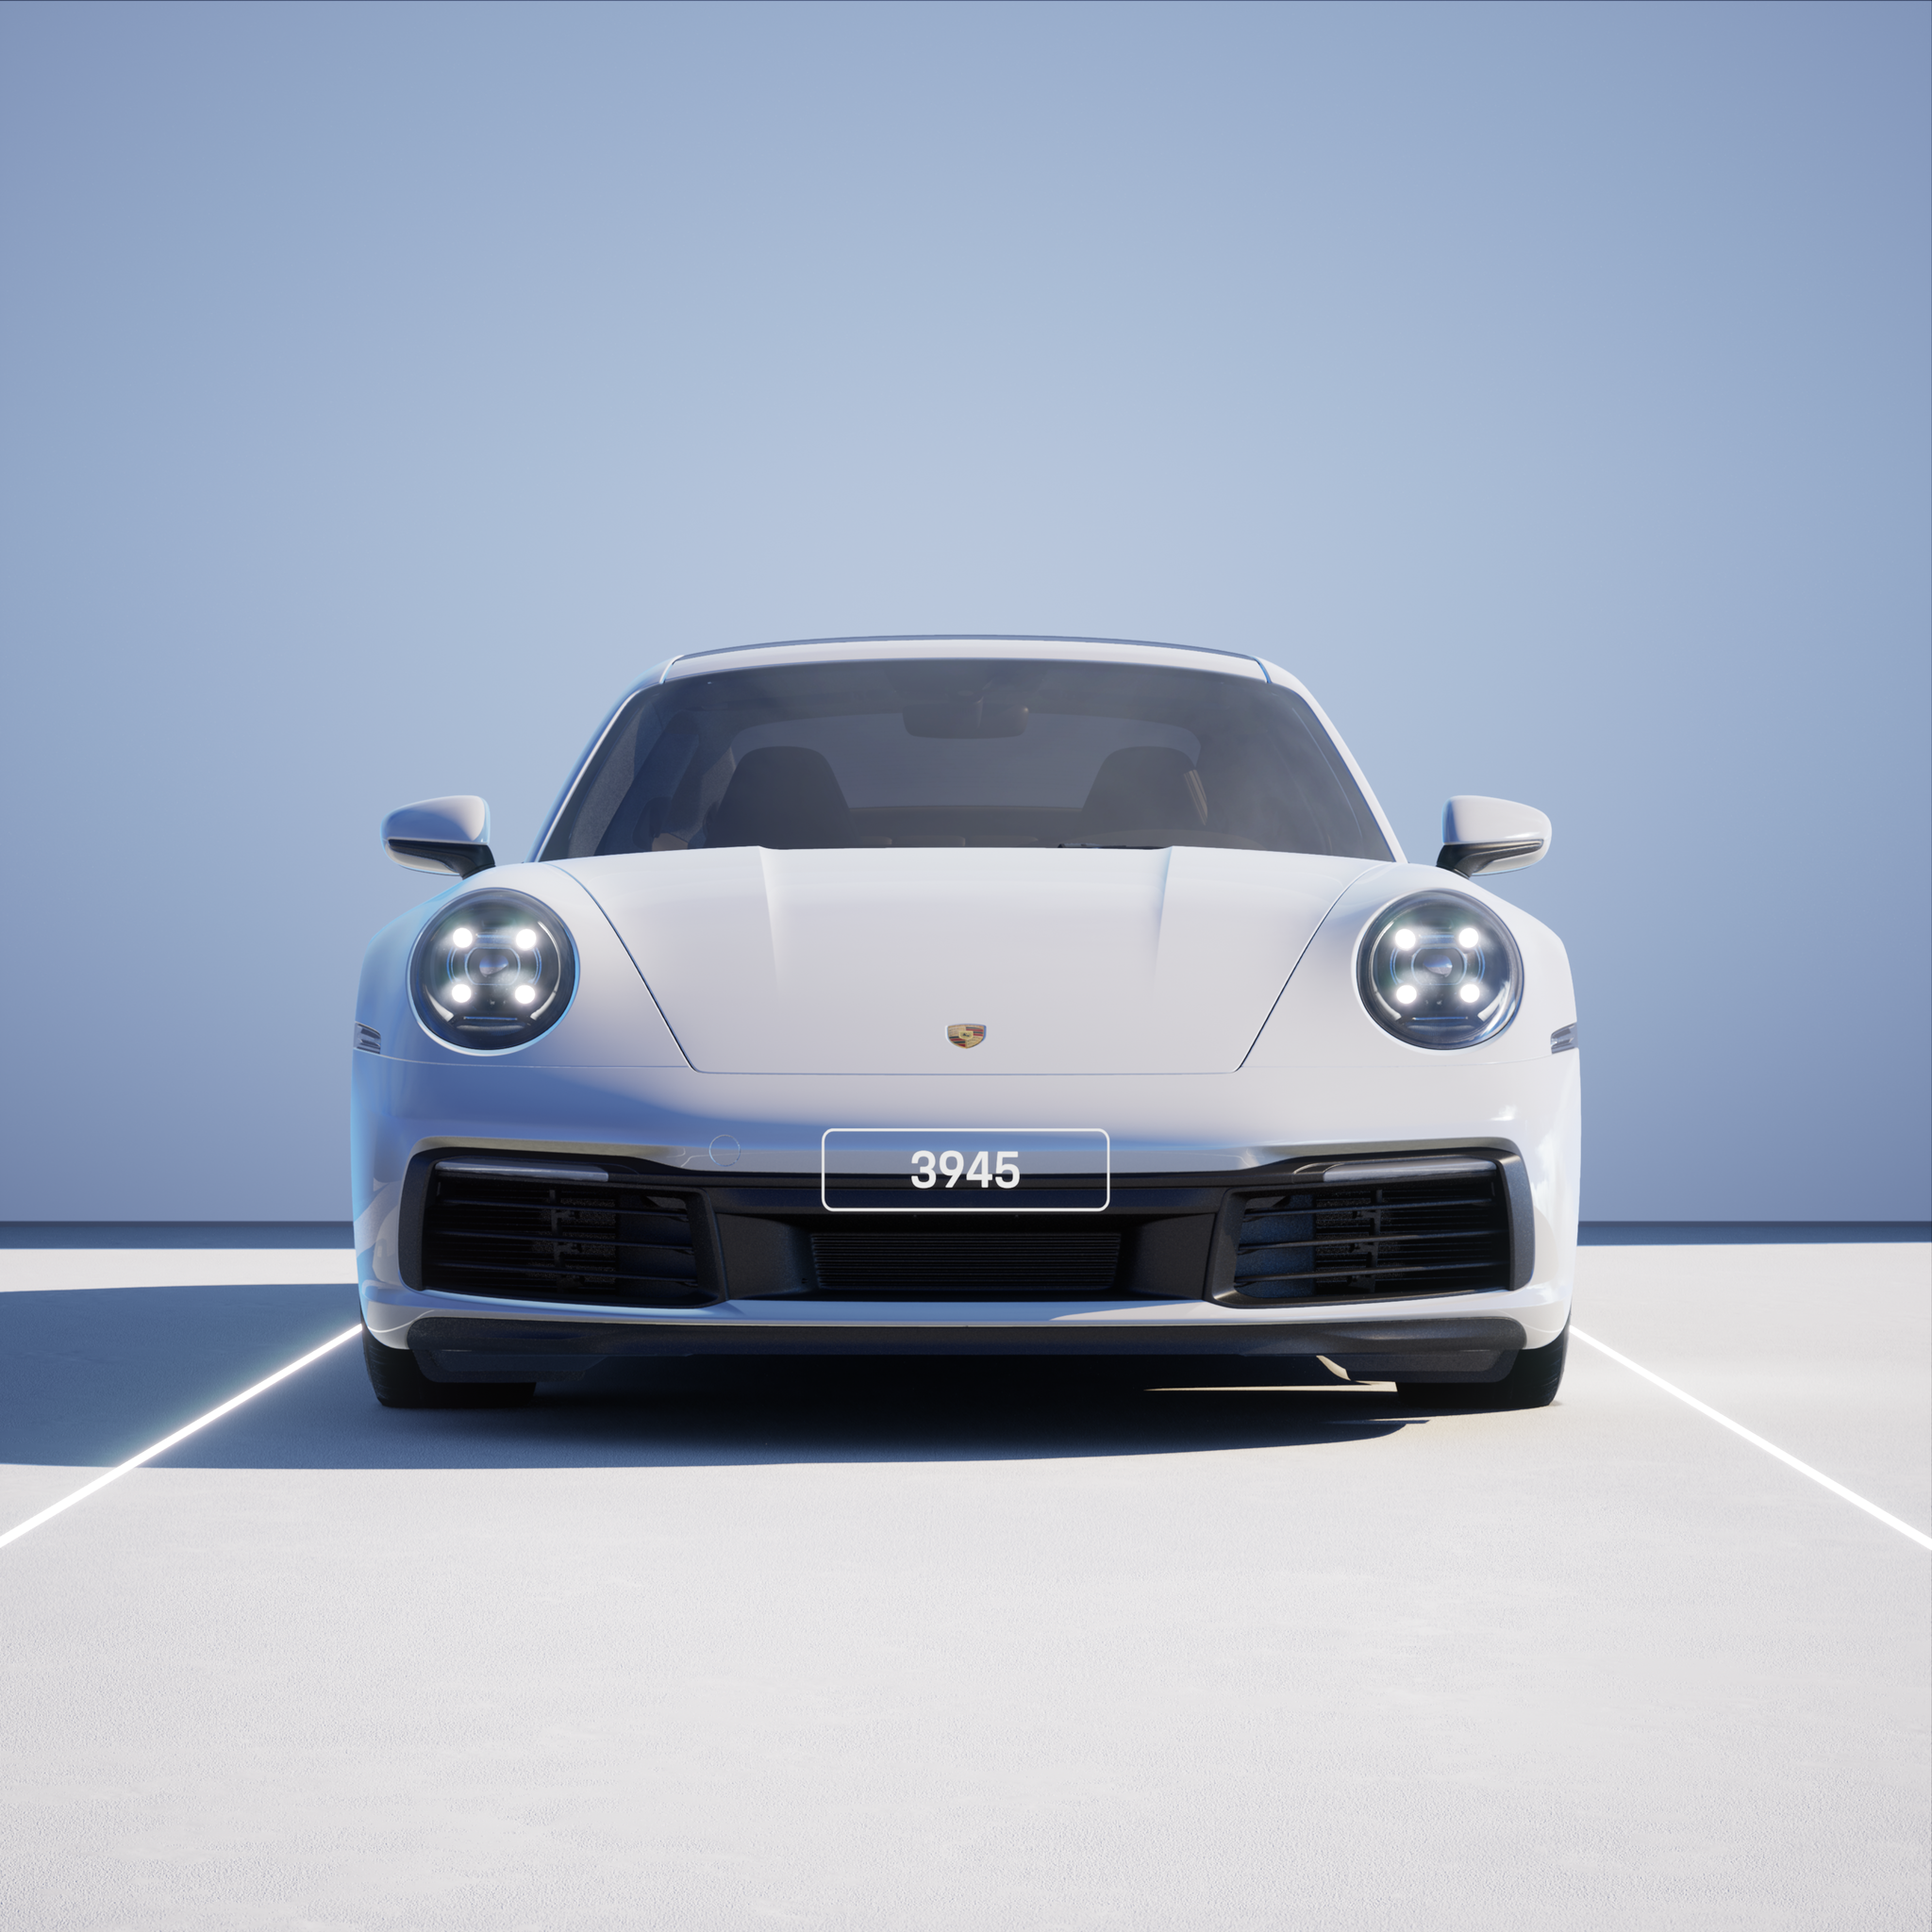 The PORSCHΞ 911 3945 image in phase